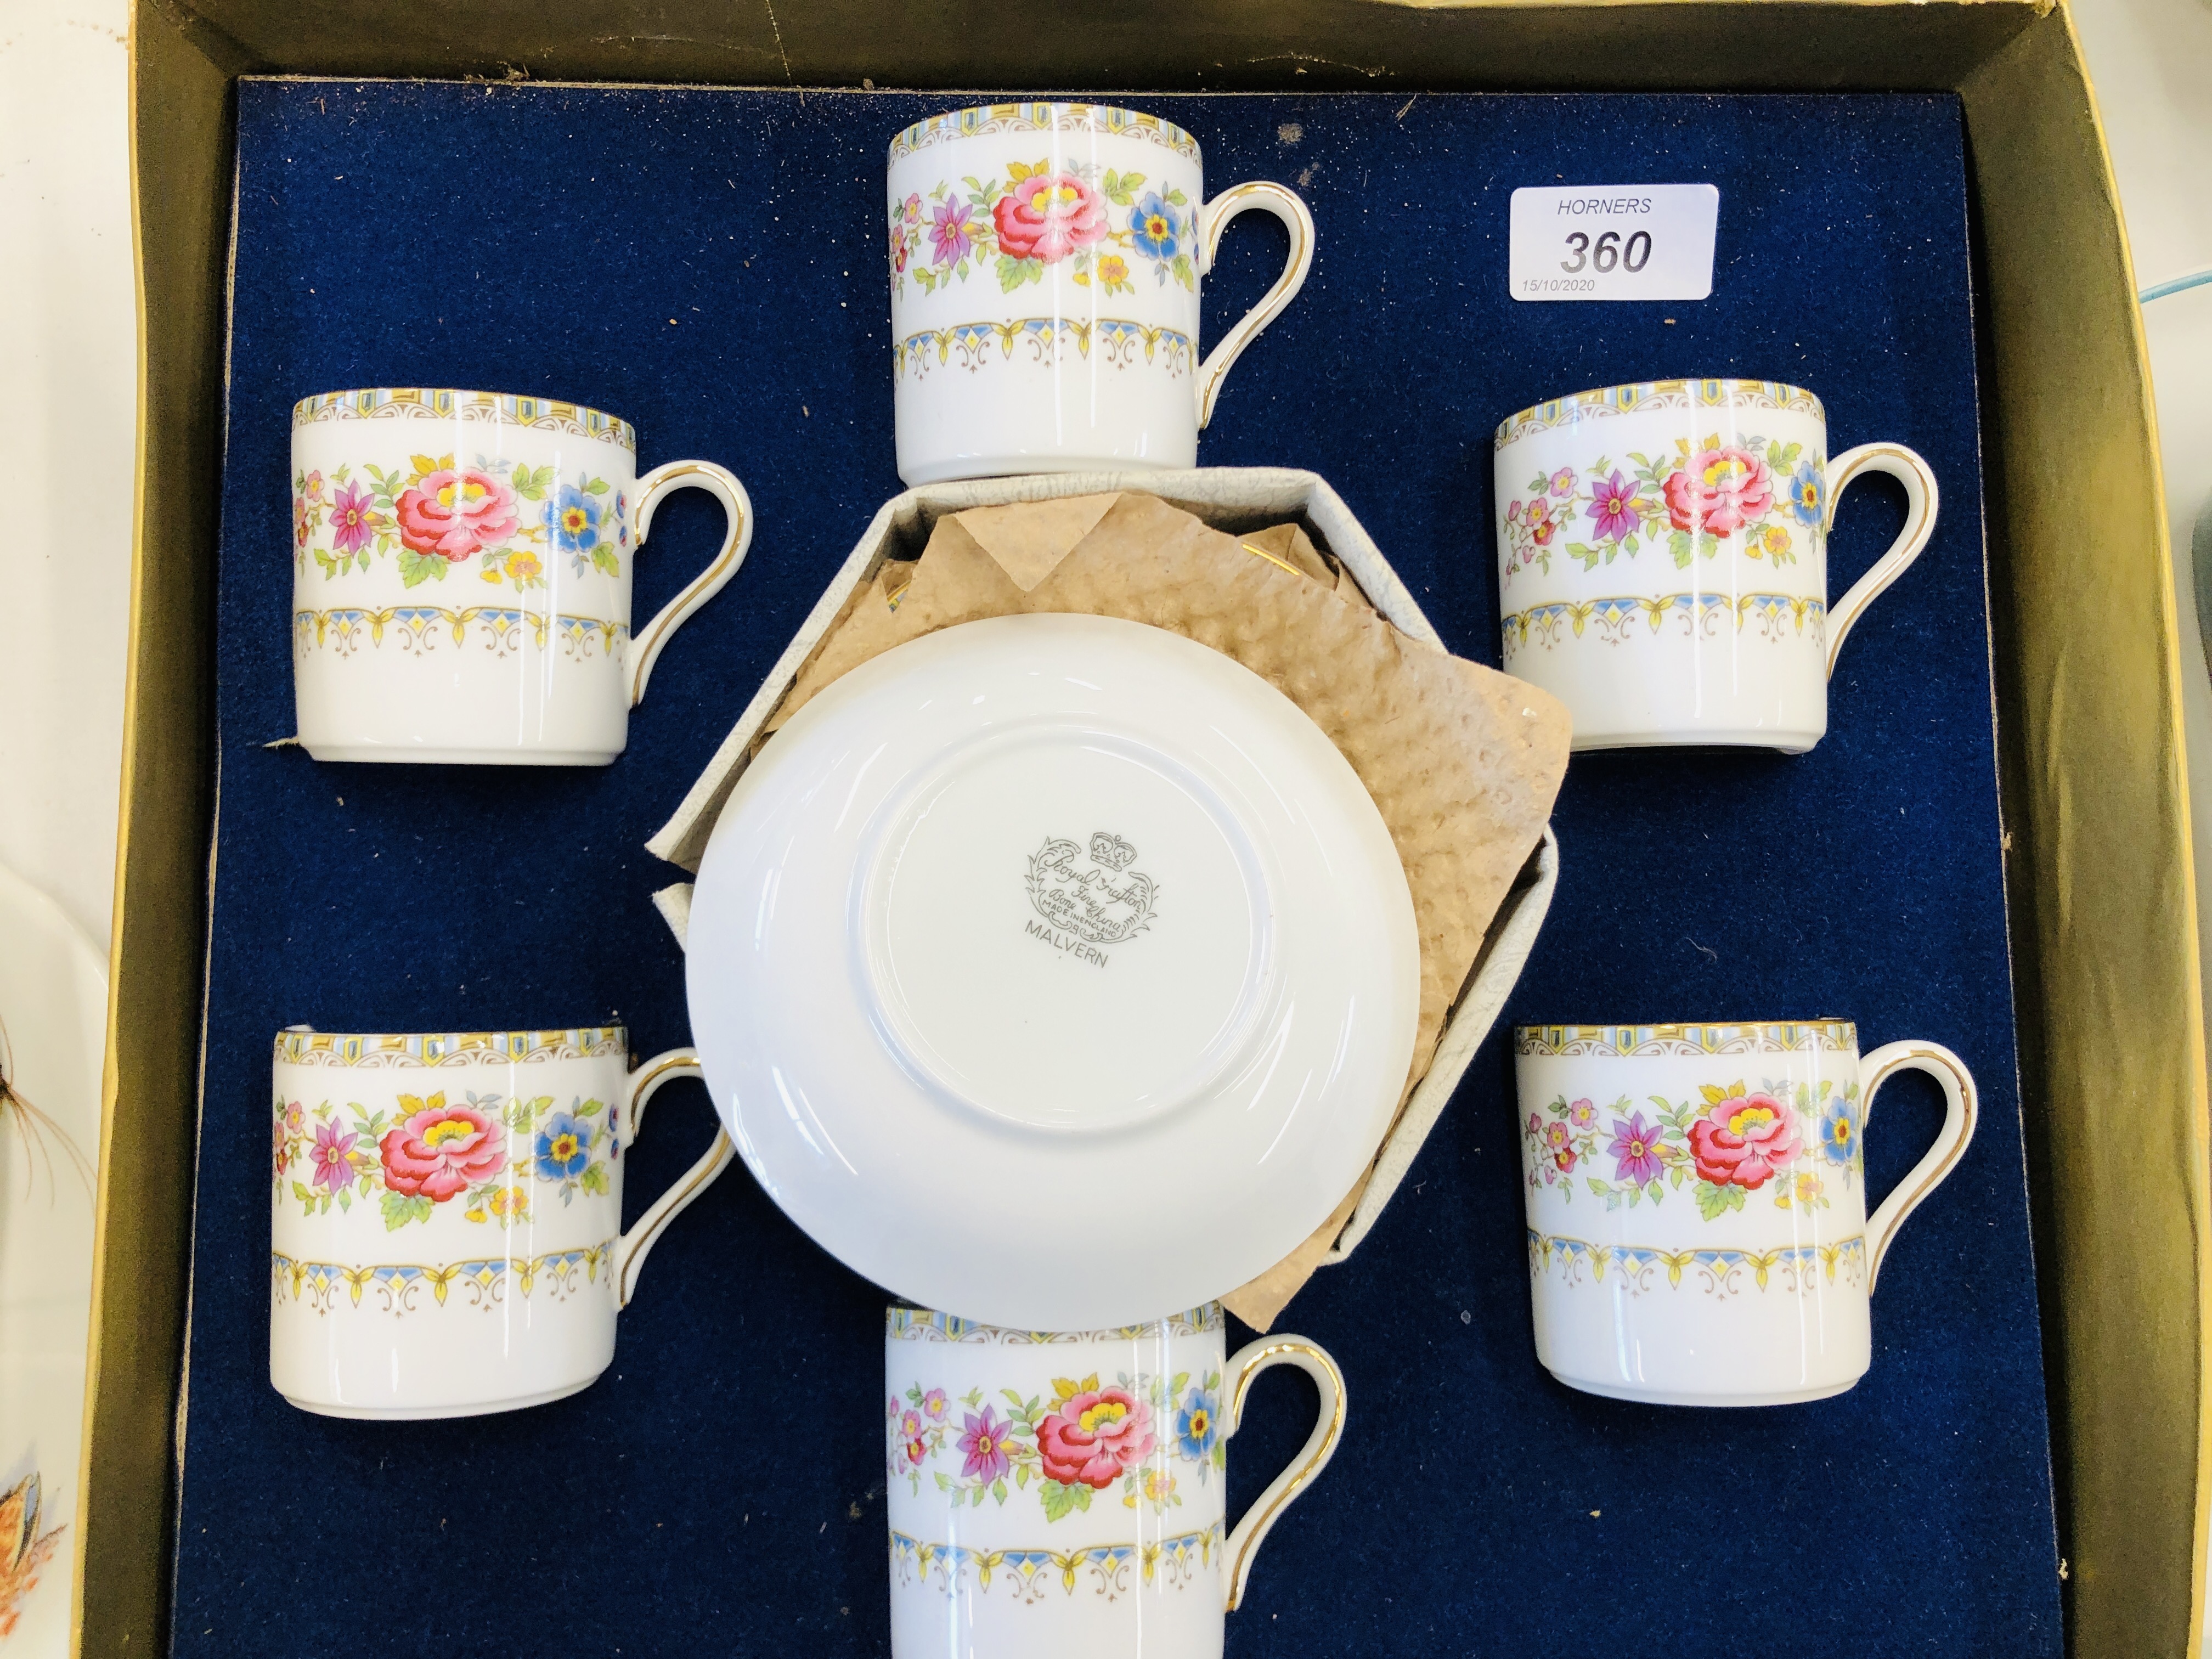 ROYAL GRAFTON "MALVERN" 12 PIECE COFFEE SET (BOXED) AND THREE PIECES OF MINTON HADDON HALL WARE TO - Image 4 of 4